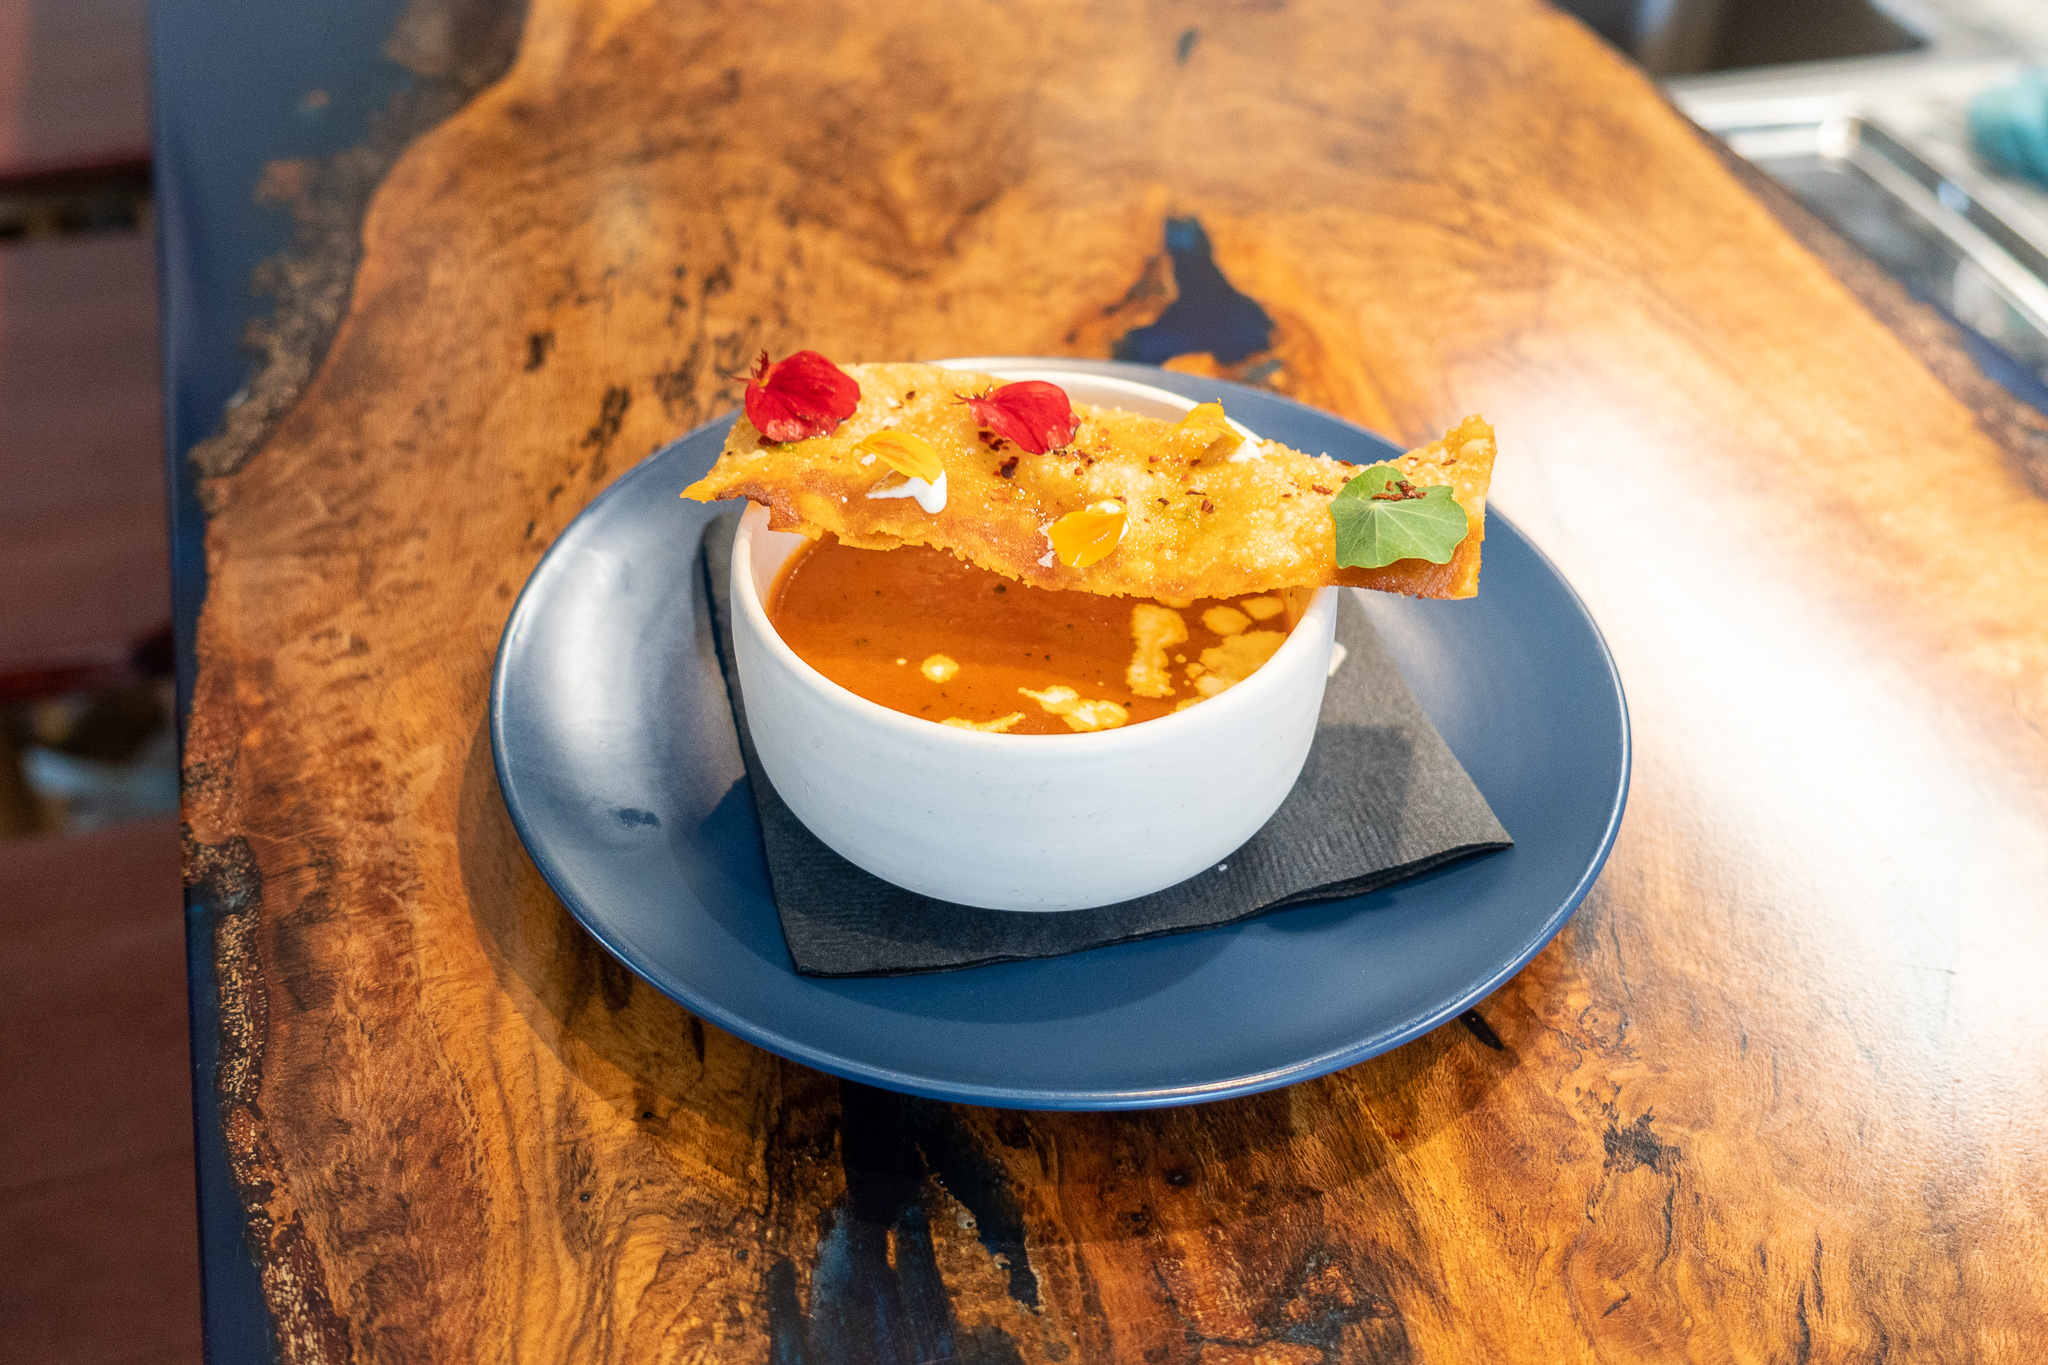 Bin 6 South Roasted Red Pepper Soup